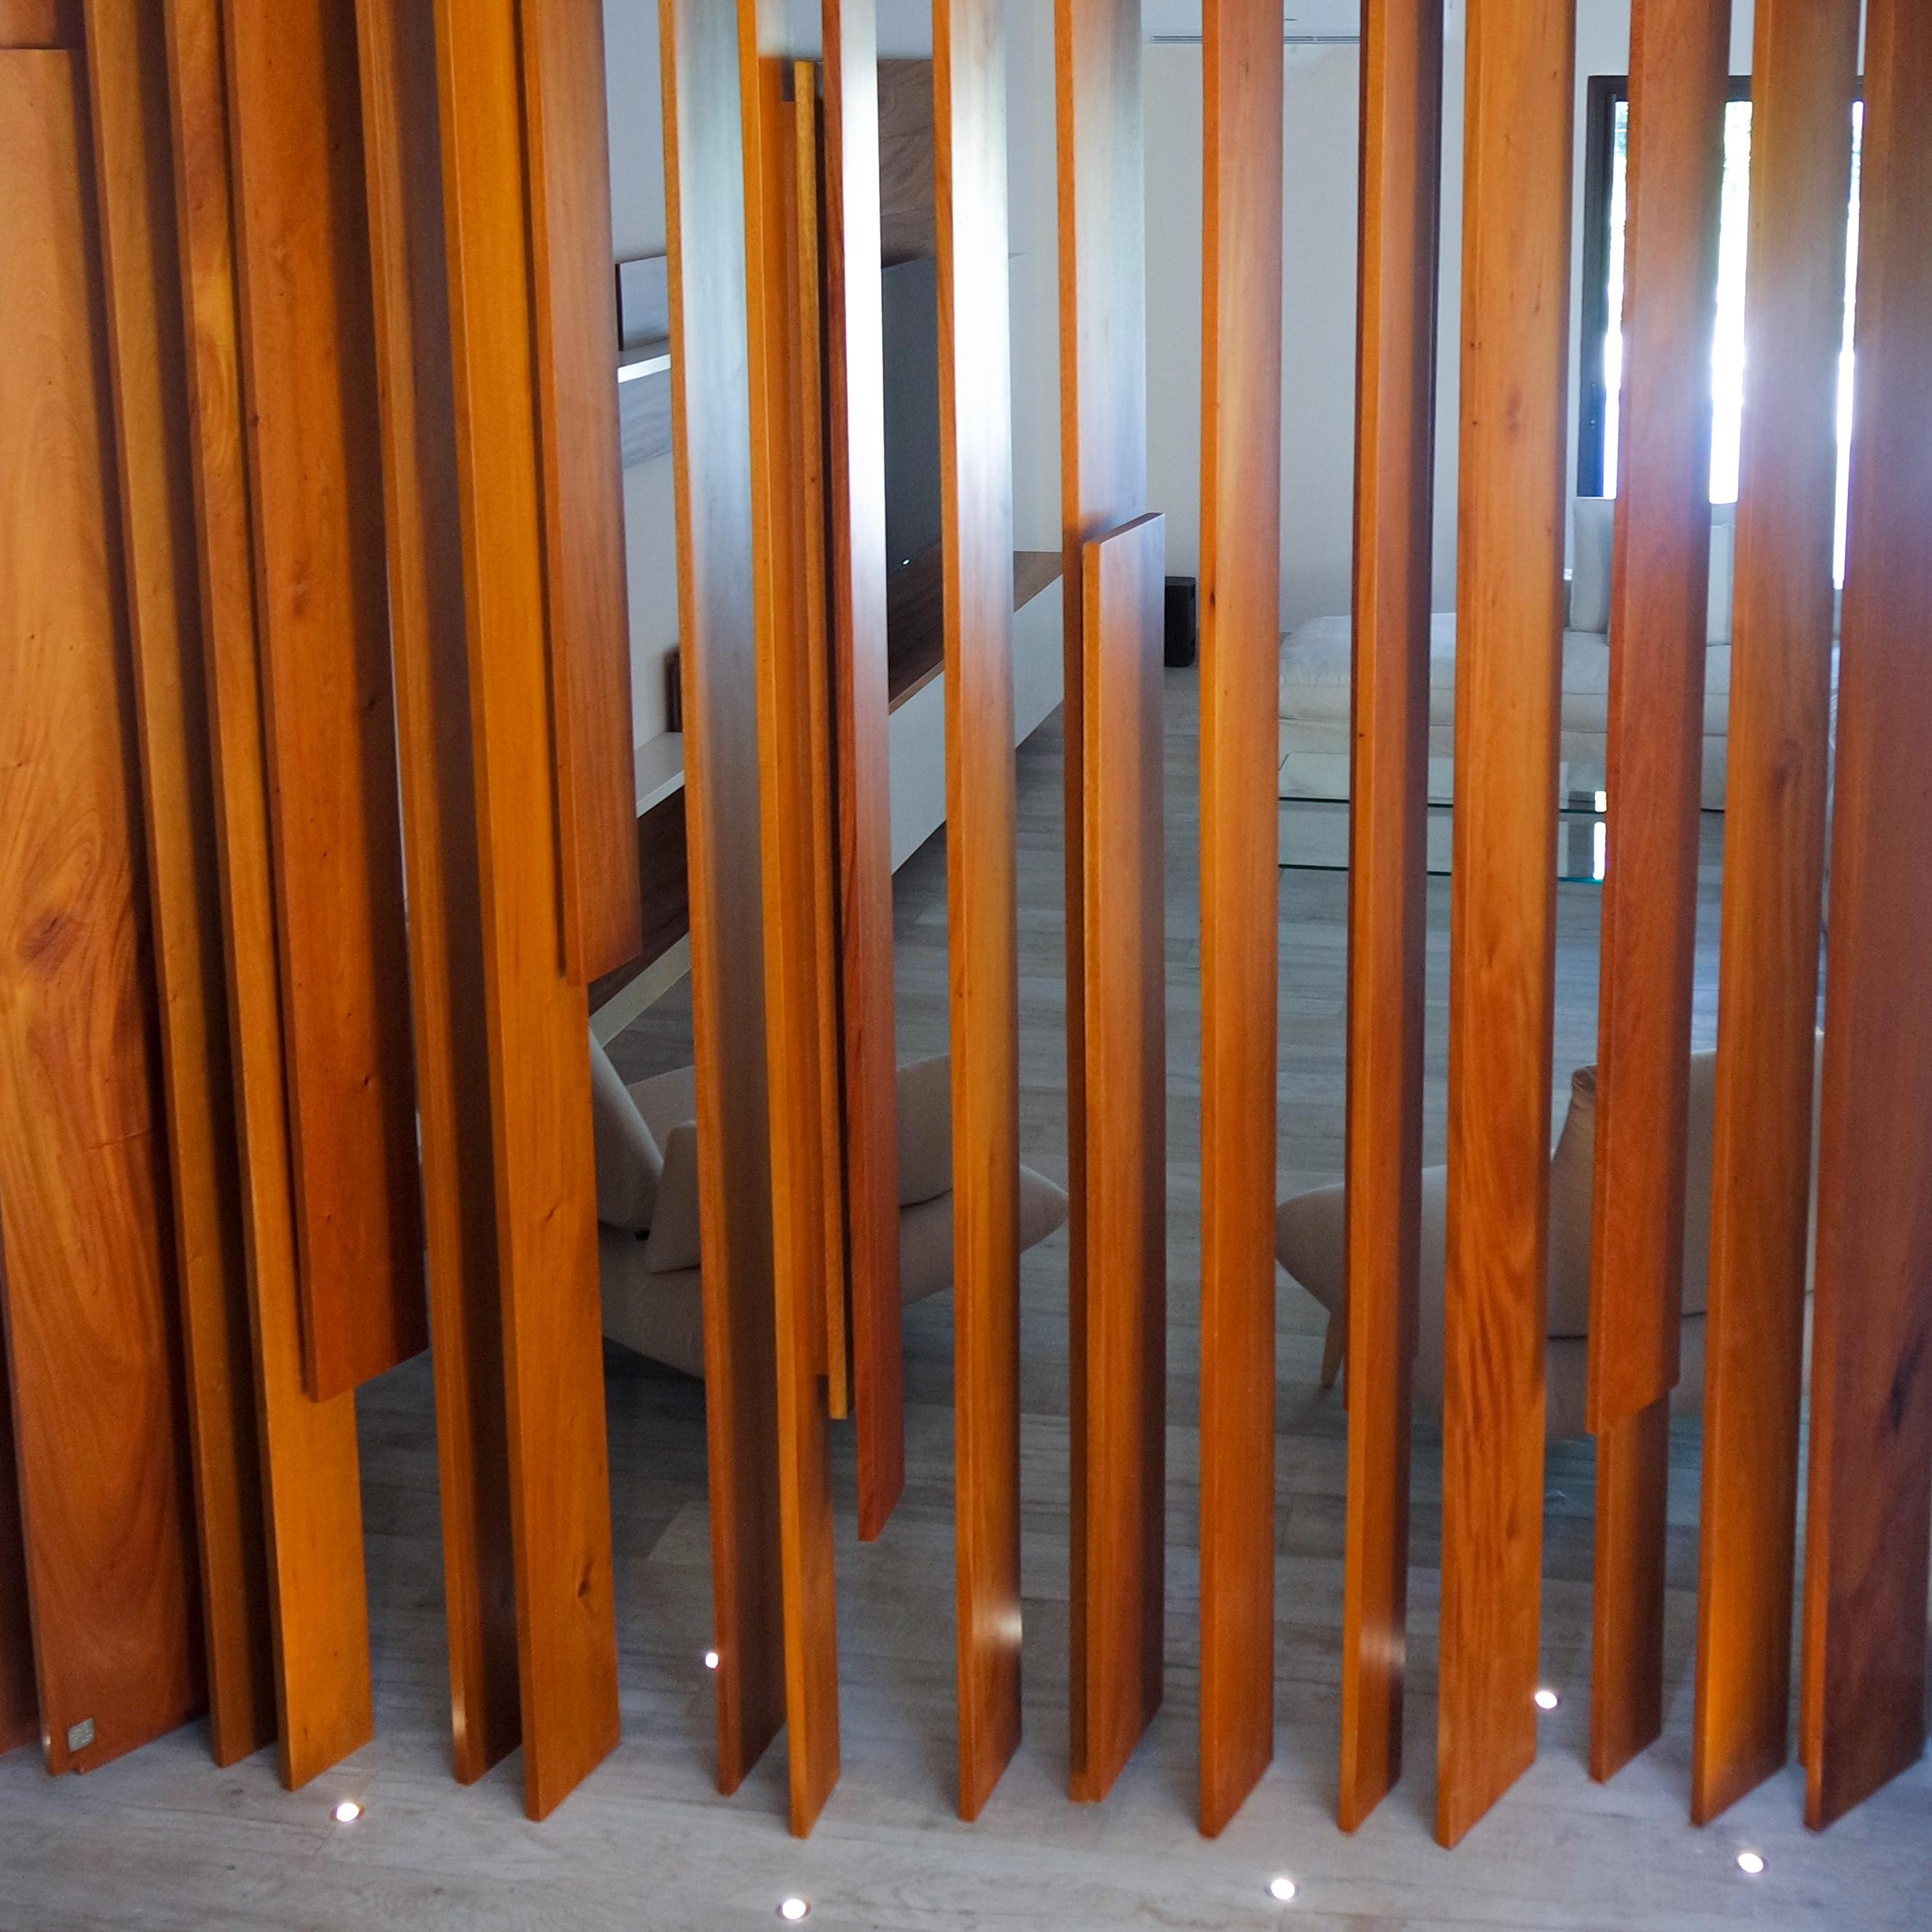 Varnished Modern Wood Sculpture Wall Screen / Room Divider by Pierre Sarkis For Sale